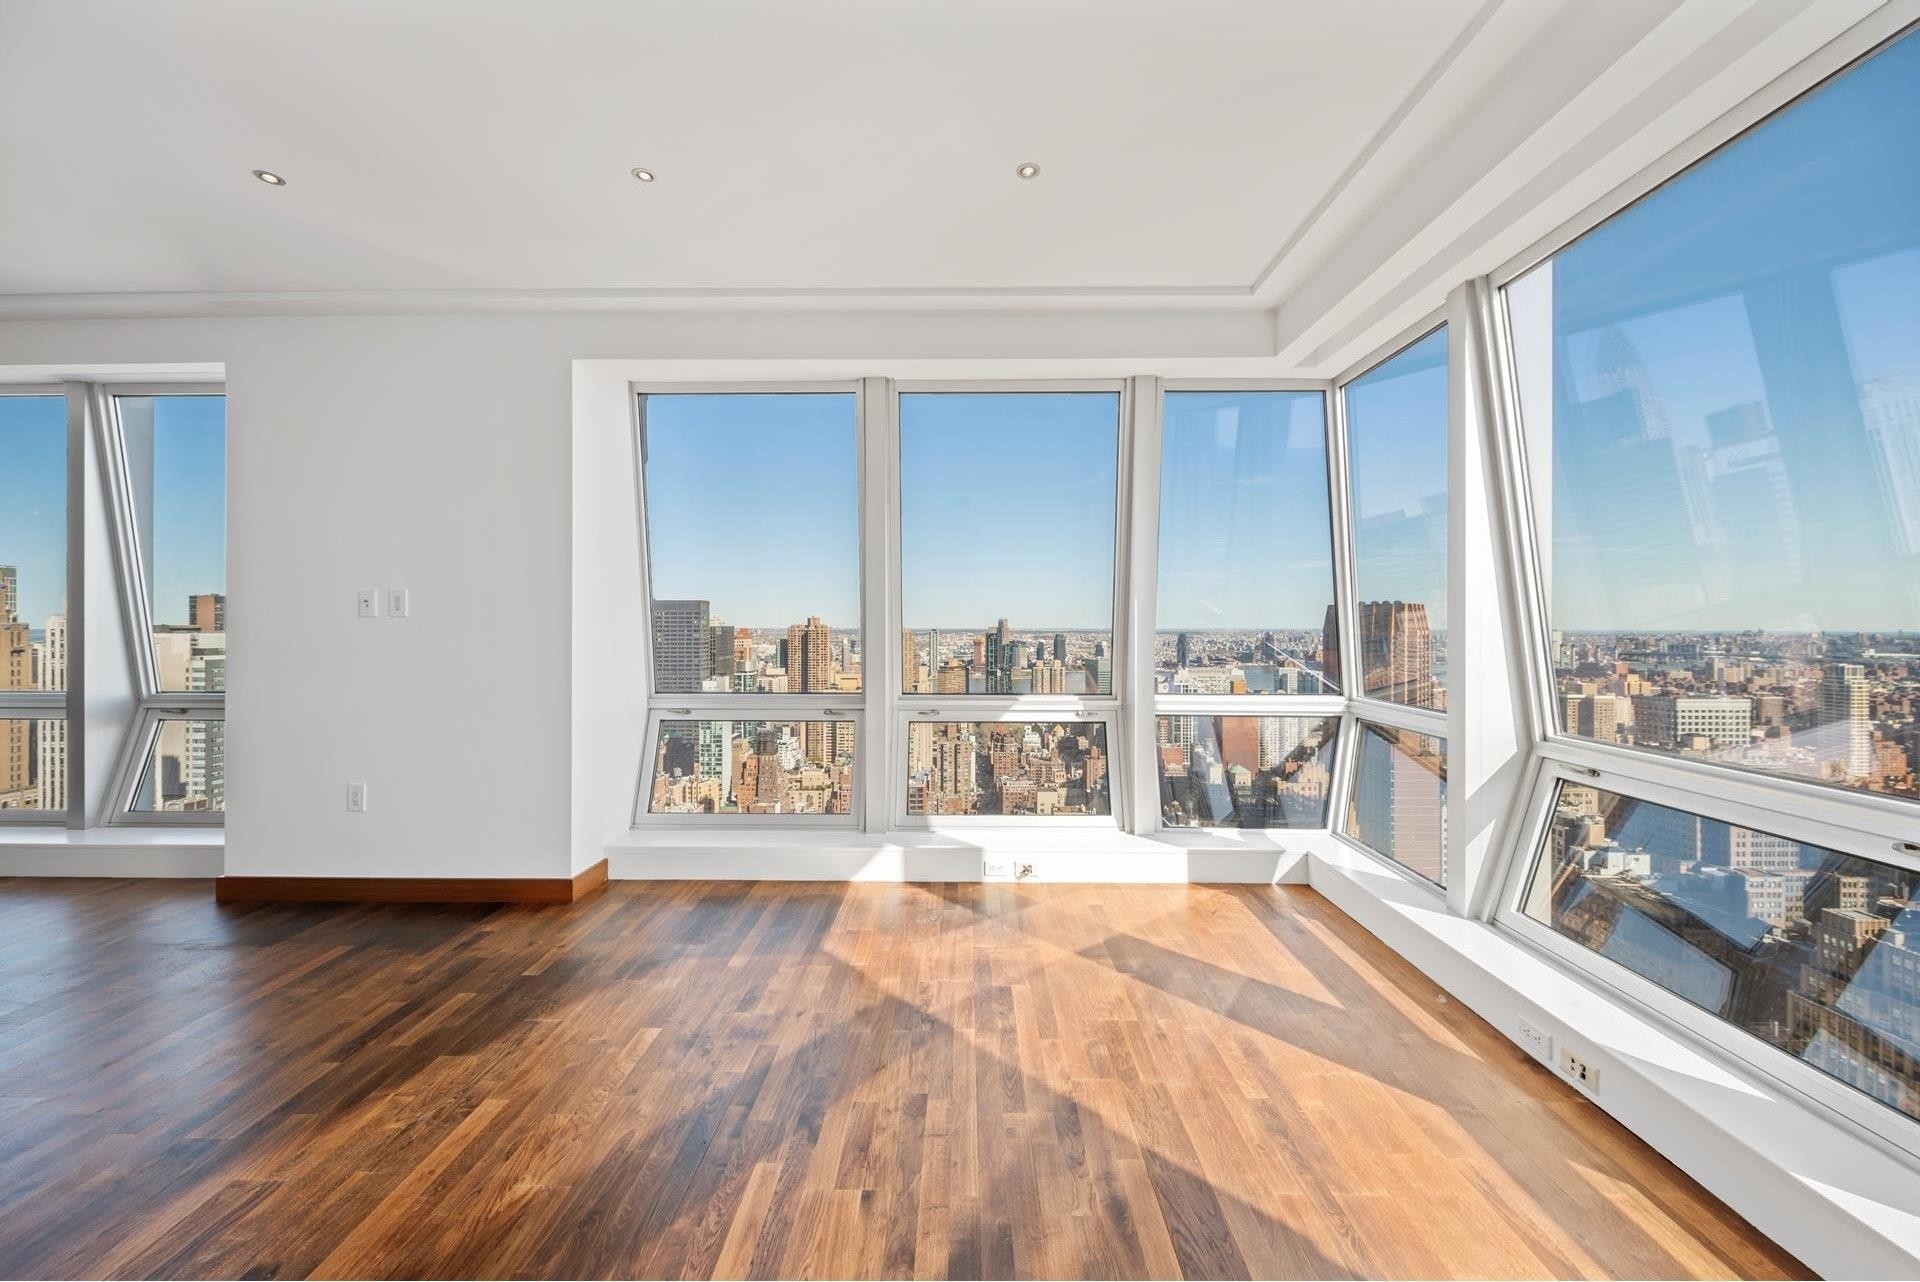 2. Rentals at Residences-Langham, 400 FIFTH AVE, 51A Midtown West, New York, New York 10018